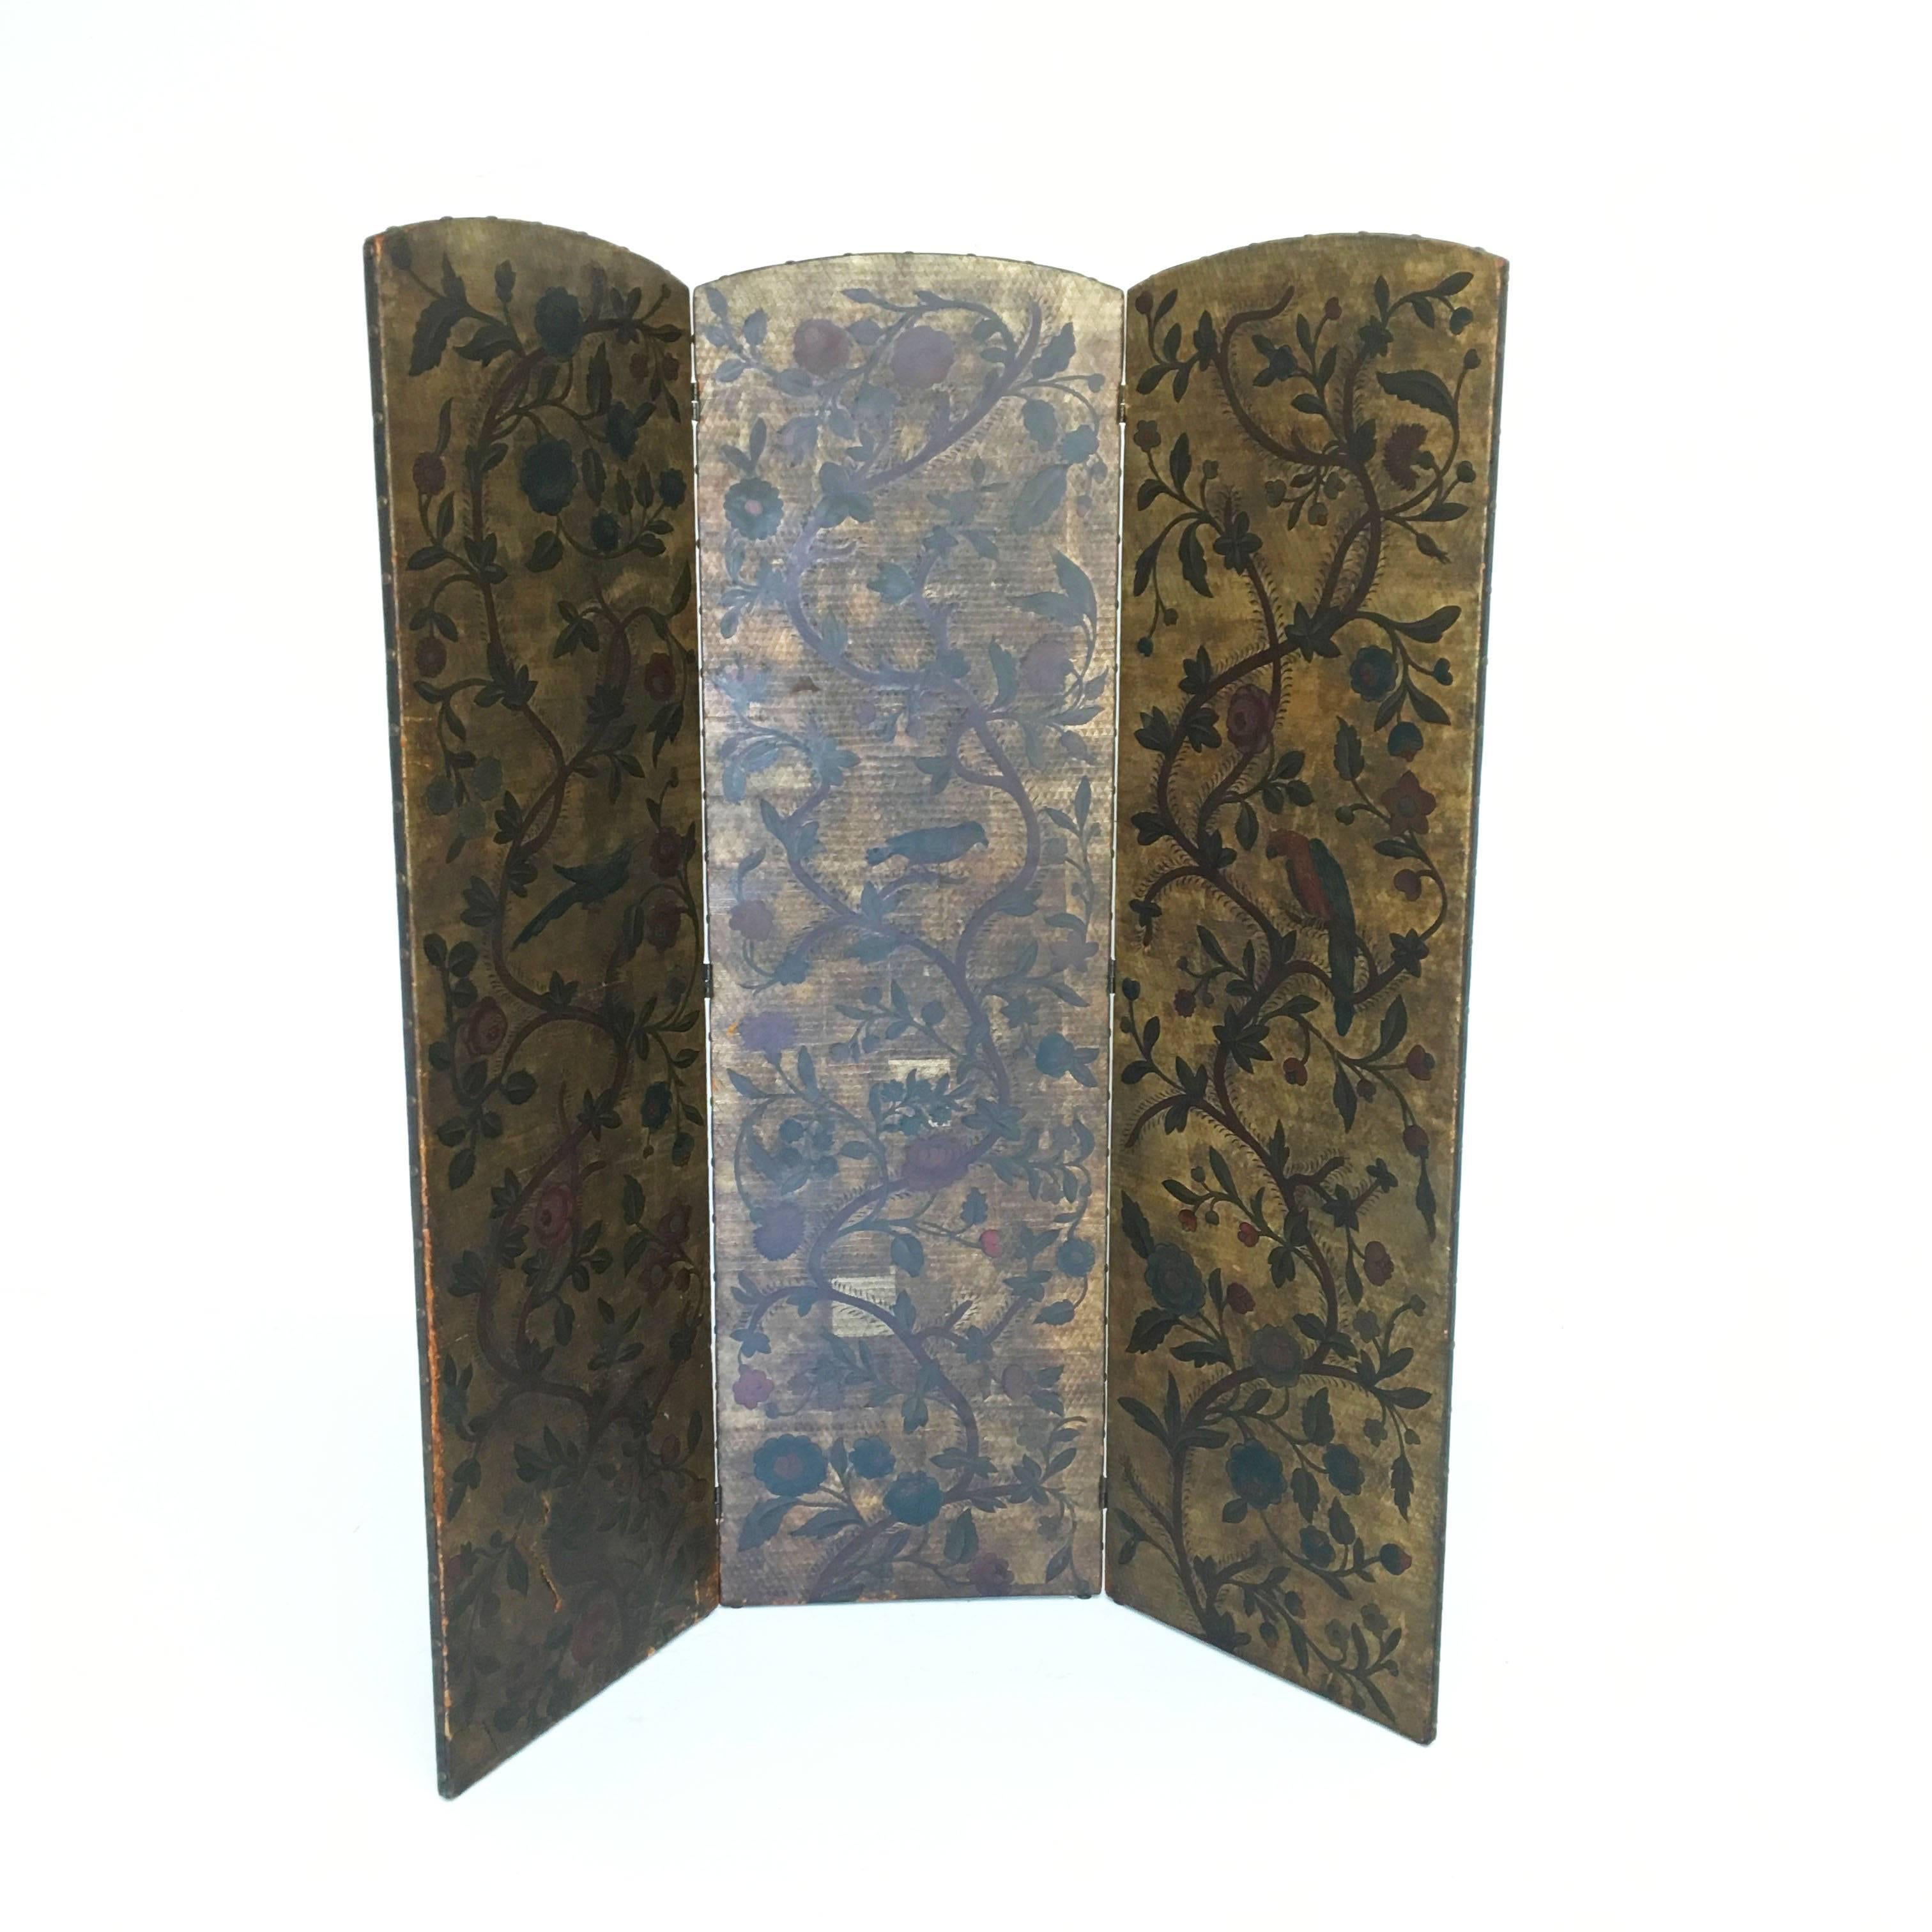 Antique Hand-Painted Leather Tri-Fold Screen In Good Condition For Sale In New Hyde Park, NY